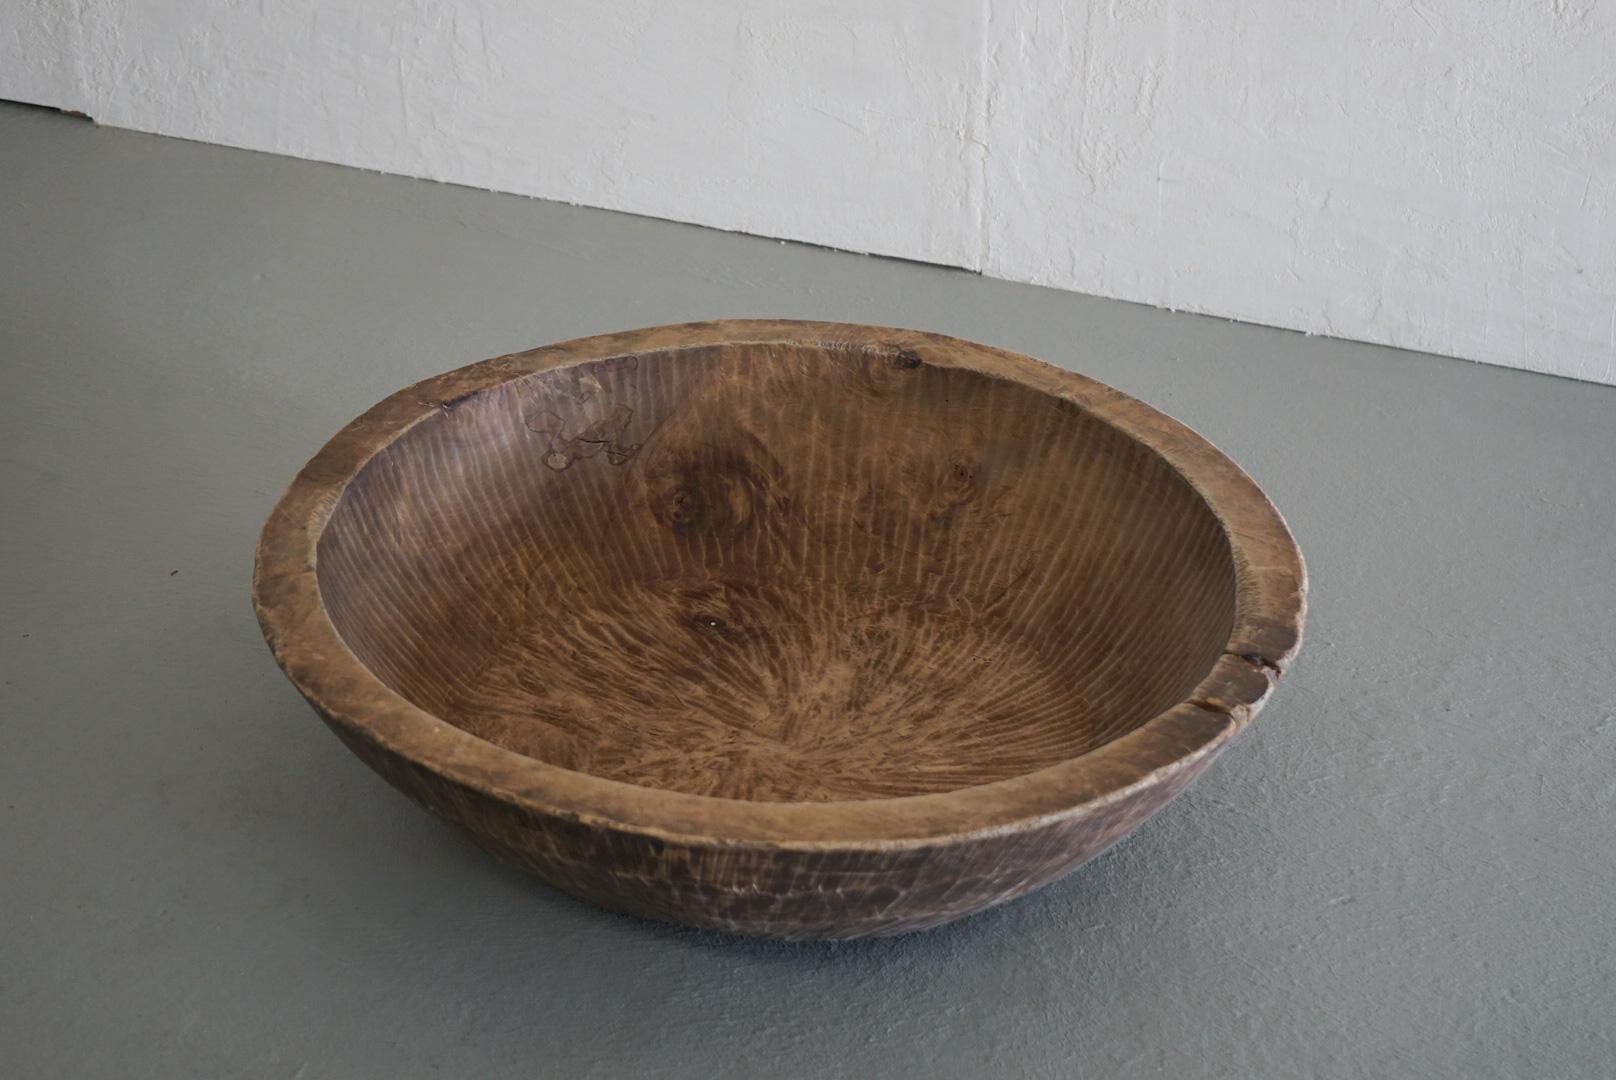 It is an old Japanese wooden bowl.
It is carved from a block of wood.
Therefore, you can see the chisel marks on the front and back.
It's a wonderful handiwork.
There are small cracks due to age.
It weighs 6.6 kg.
